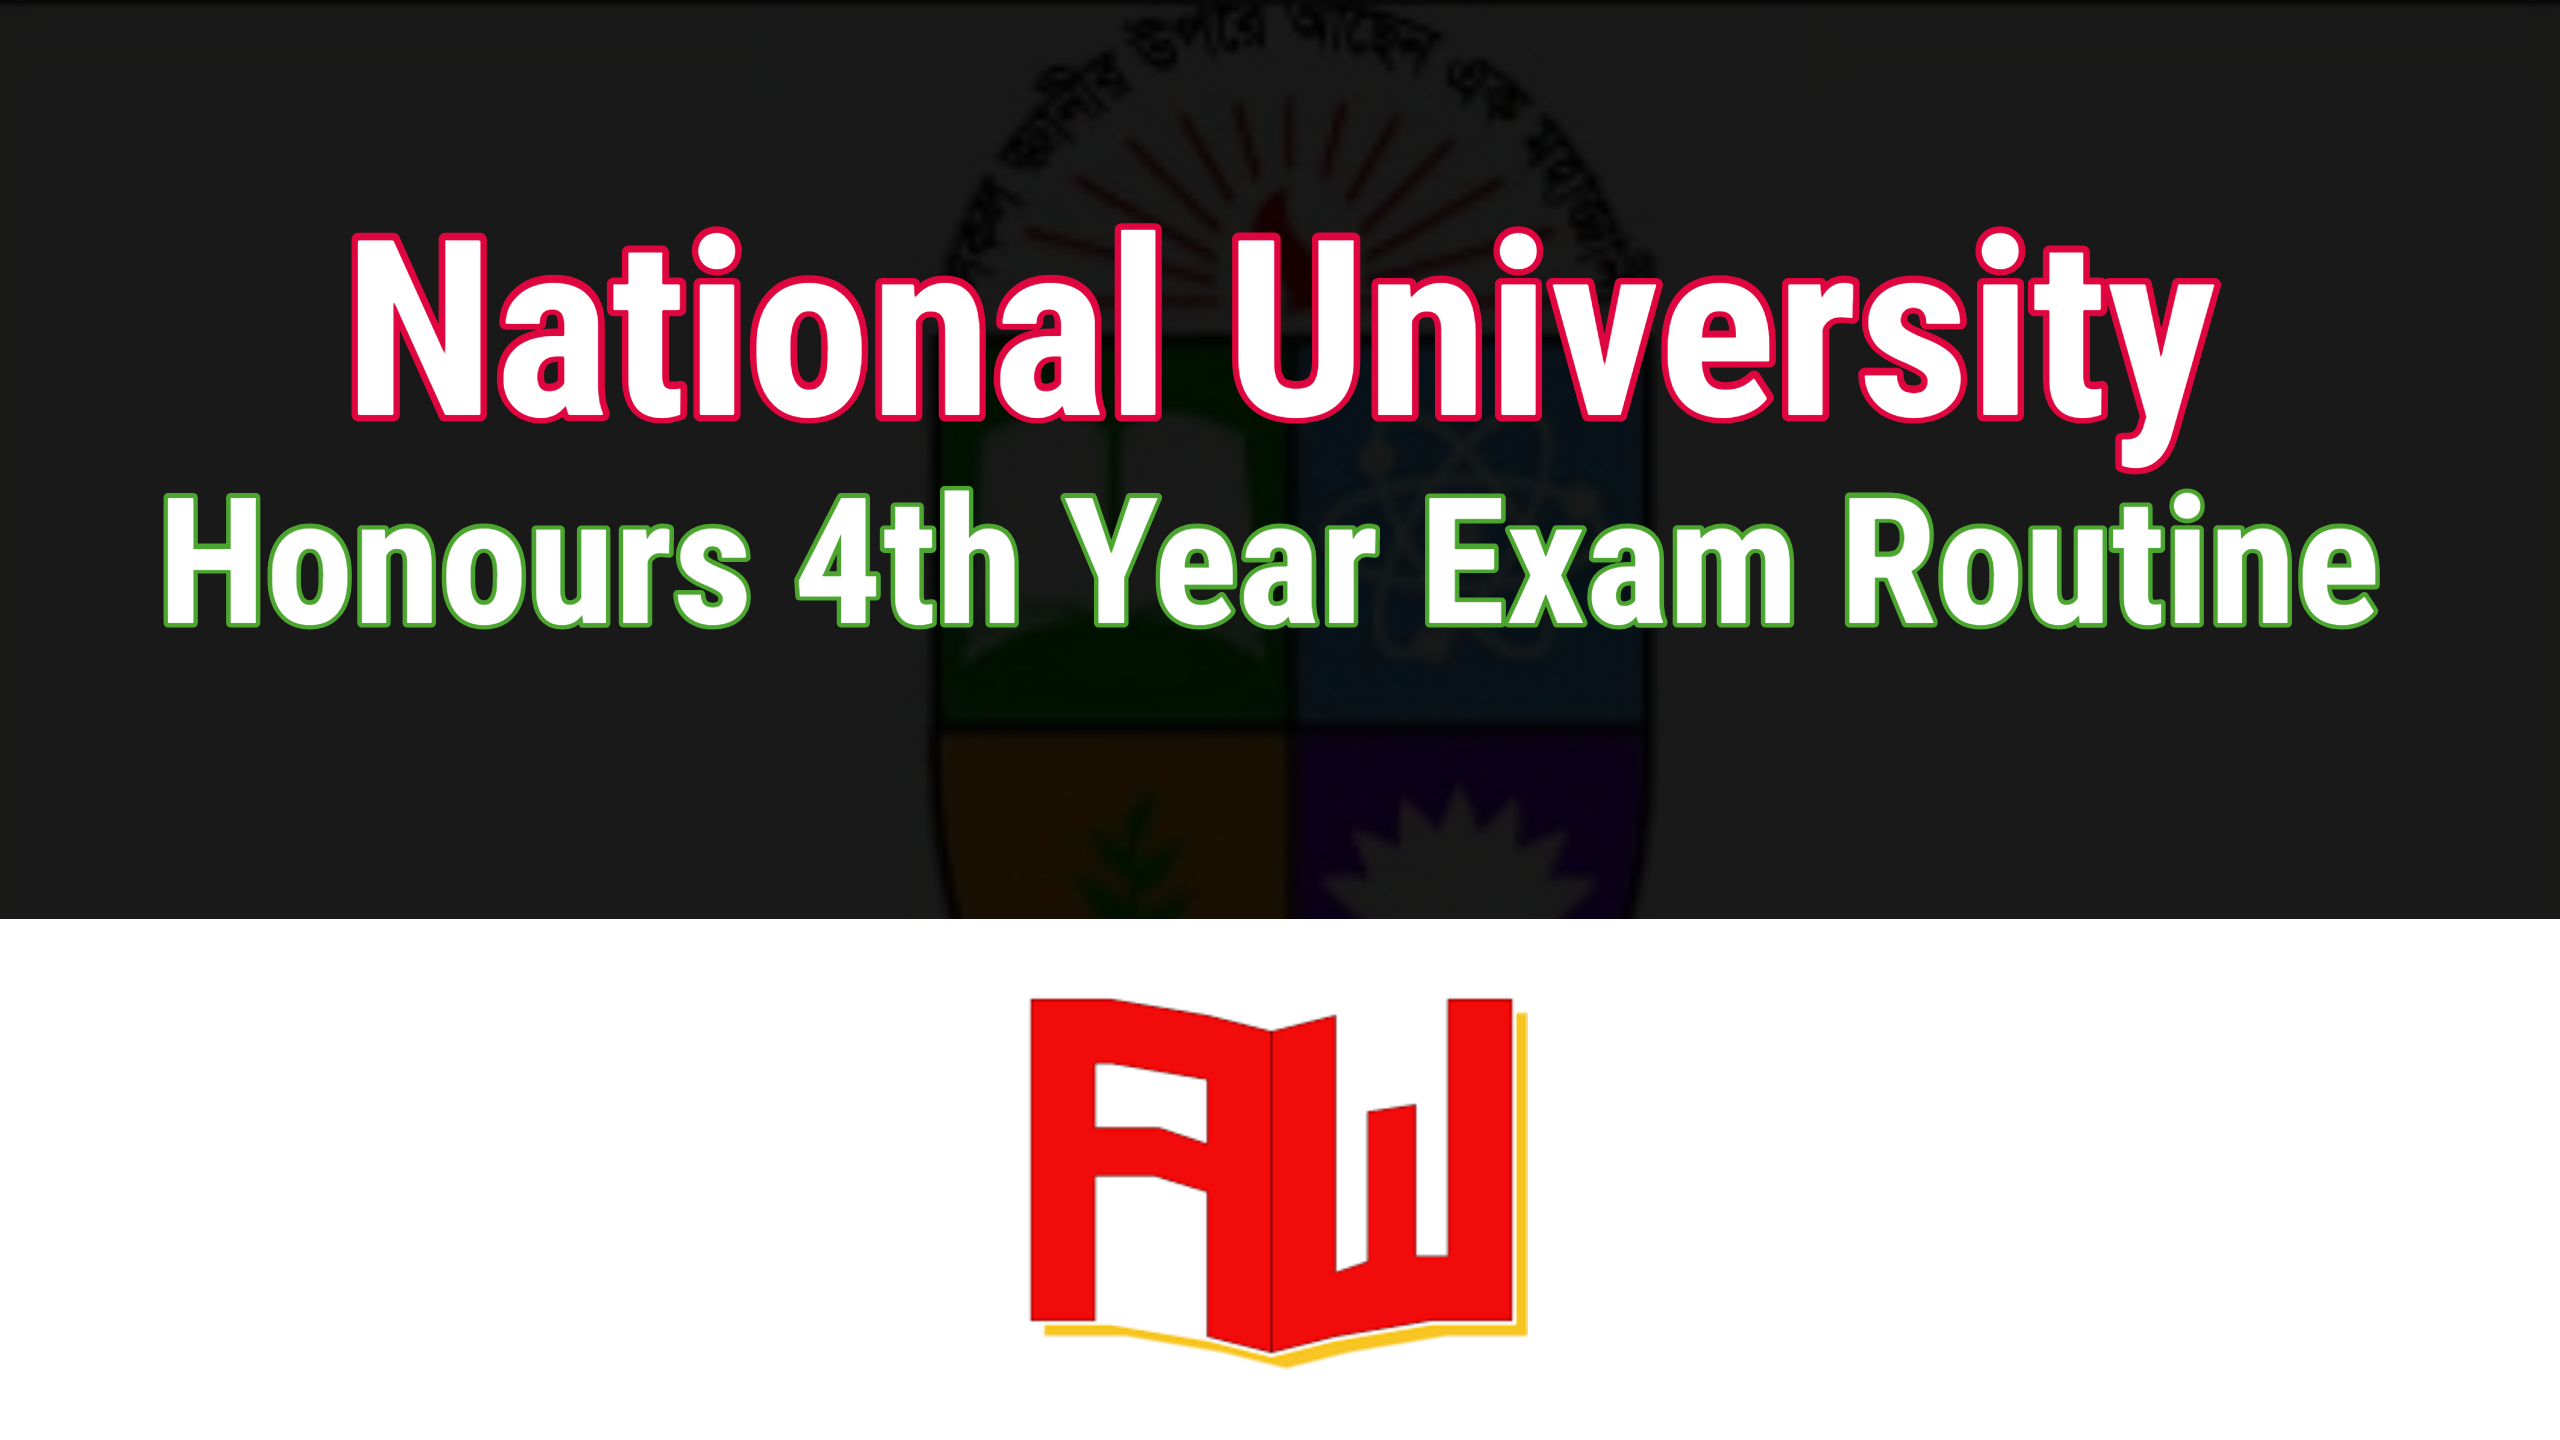 nu honours 4th year exam routine